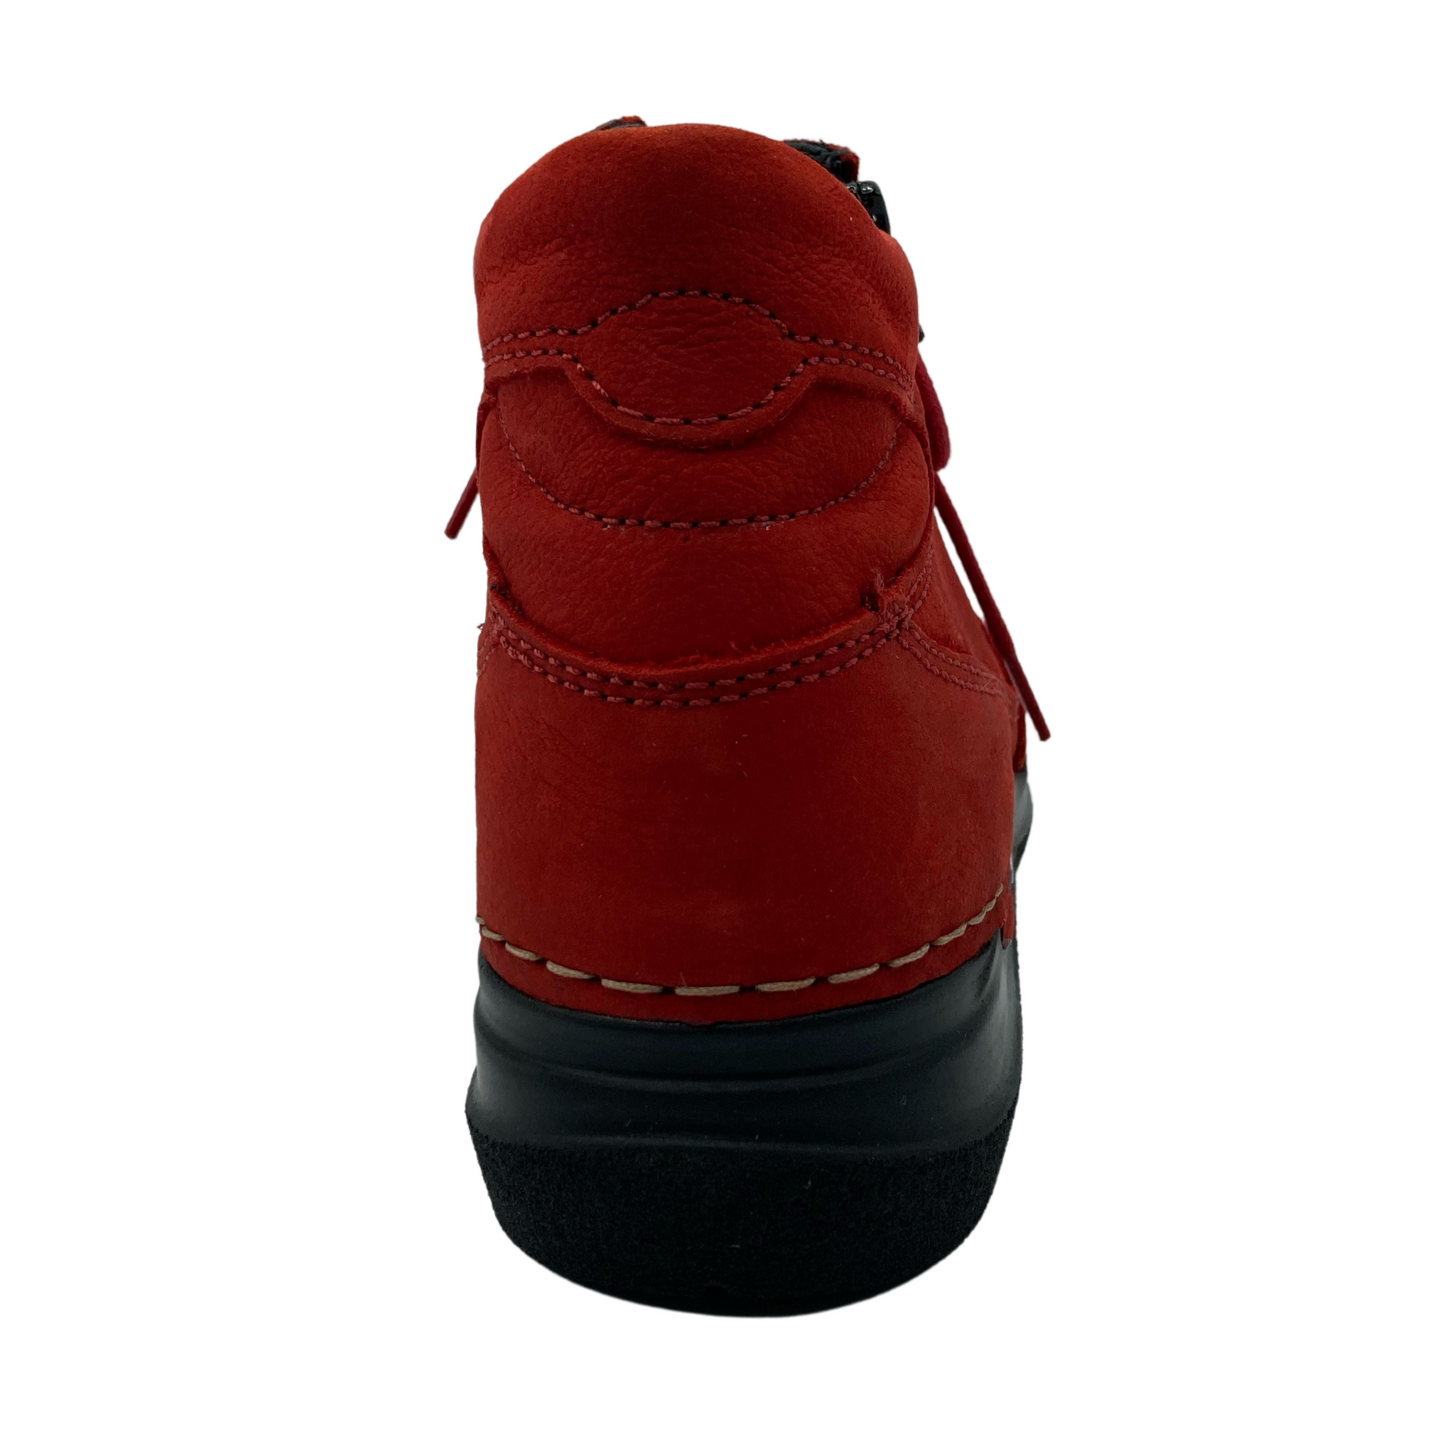 Back view of red leather walking shoe with black rubber outsole